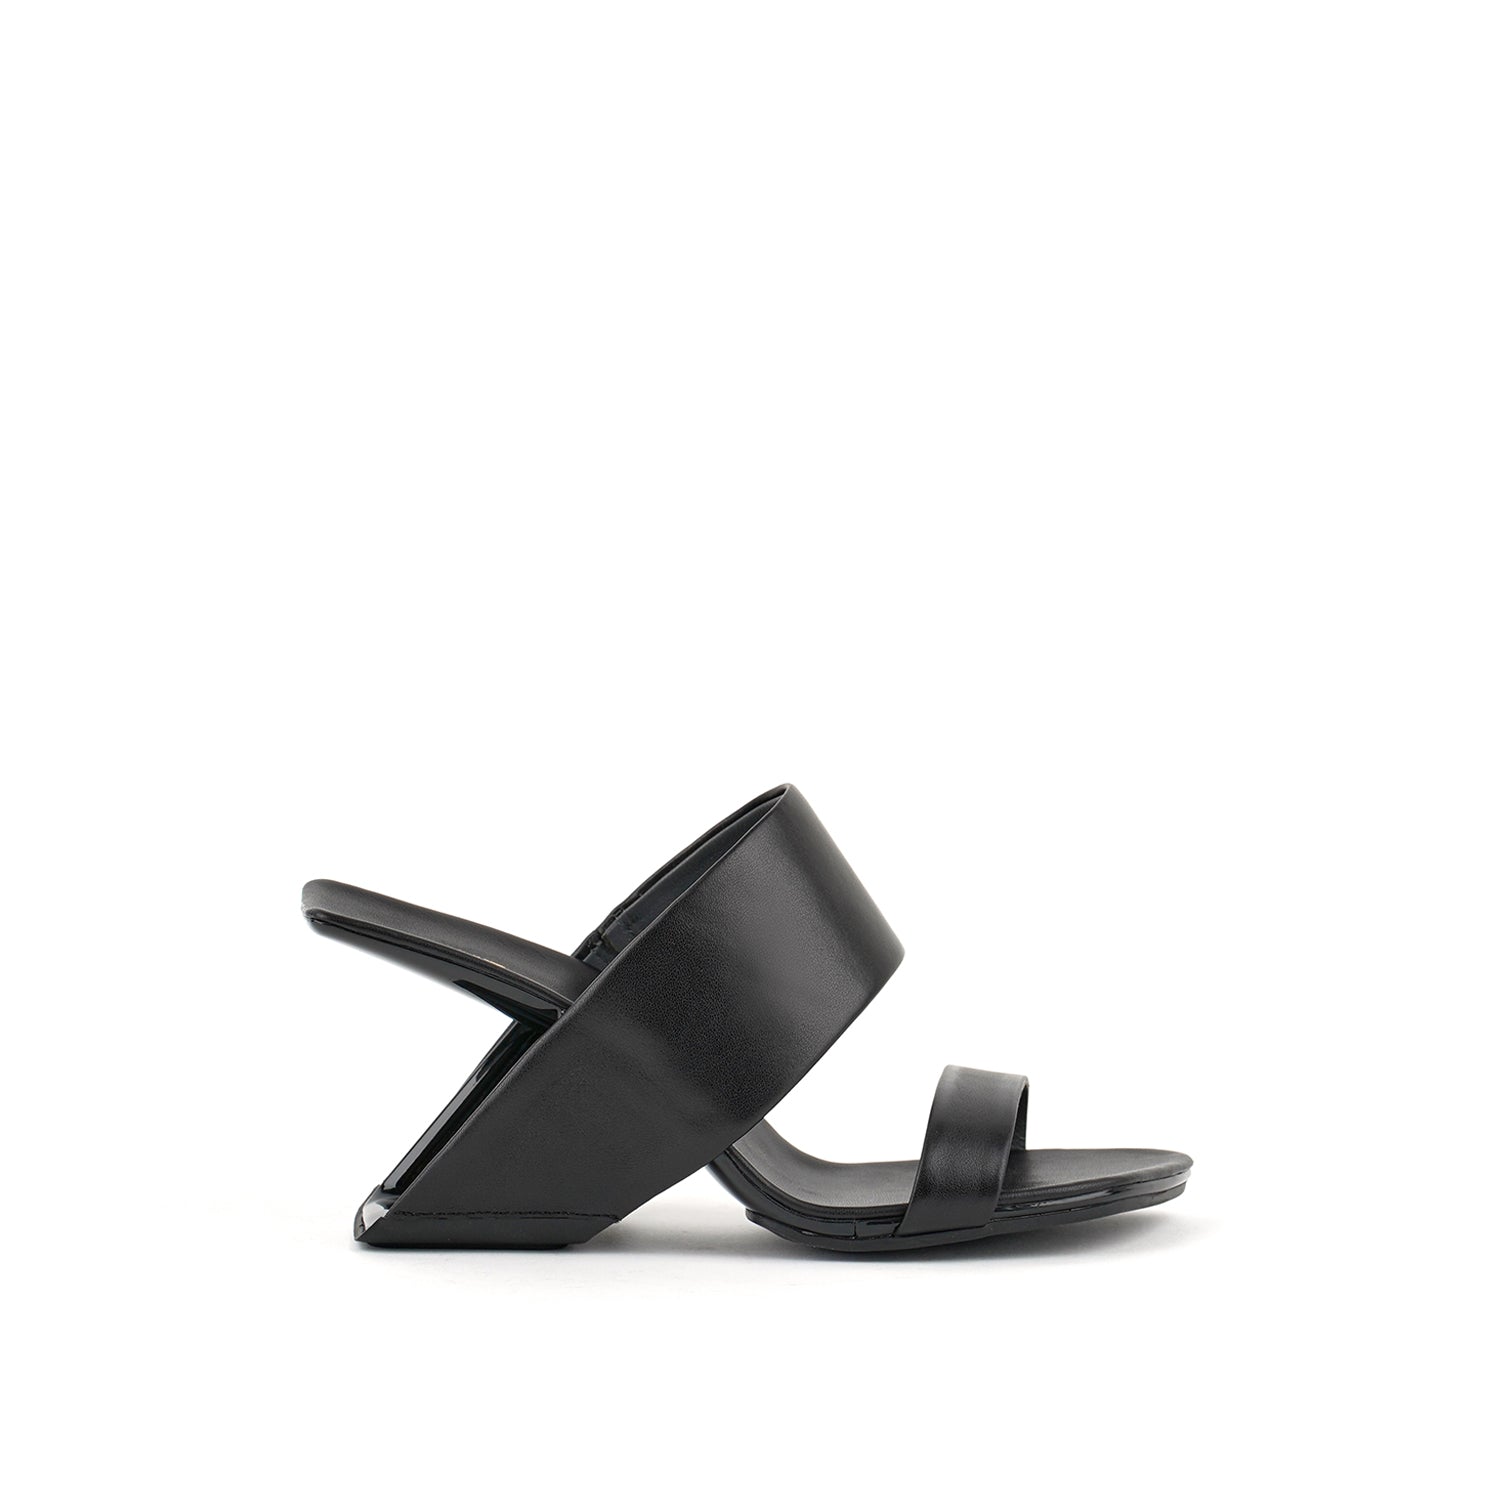 outer side view of the united nude loop hi sandal. This black square toed sandal is high-heeled and showcases a floating-like heel and two bands over the instep.  